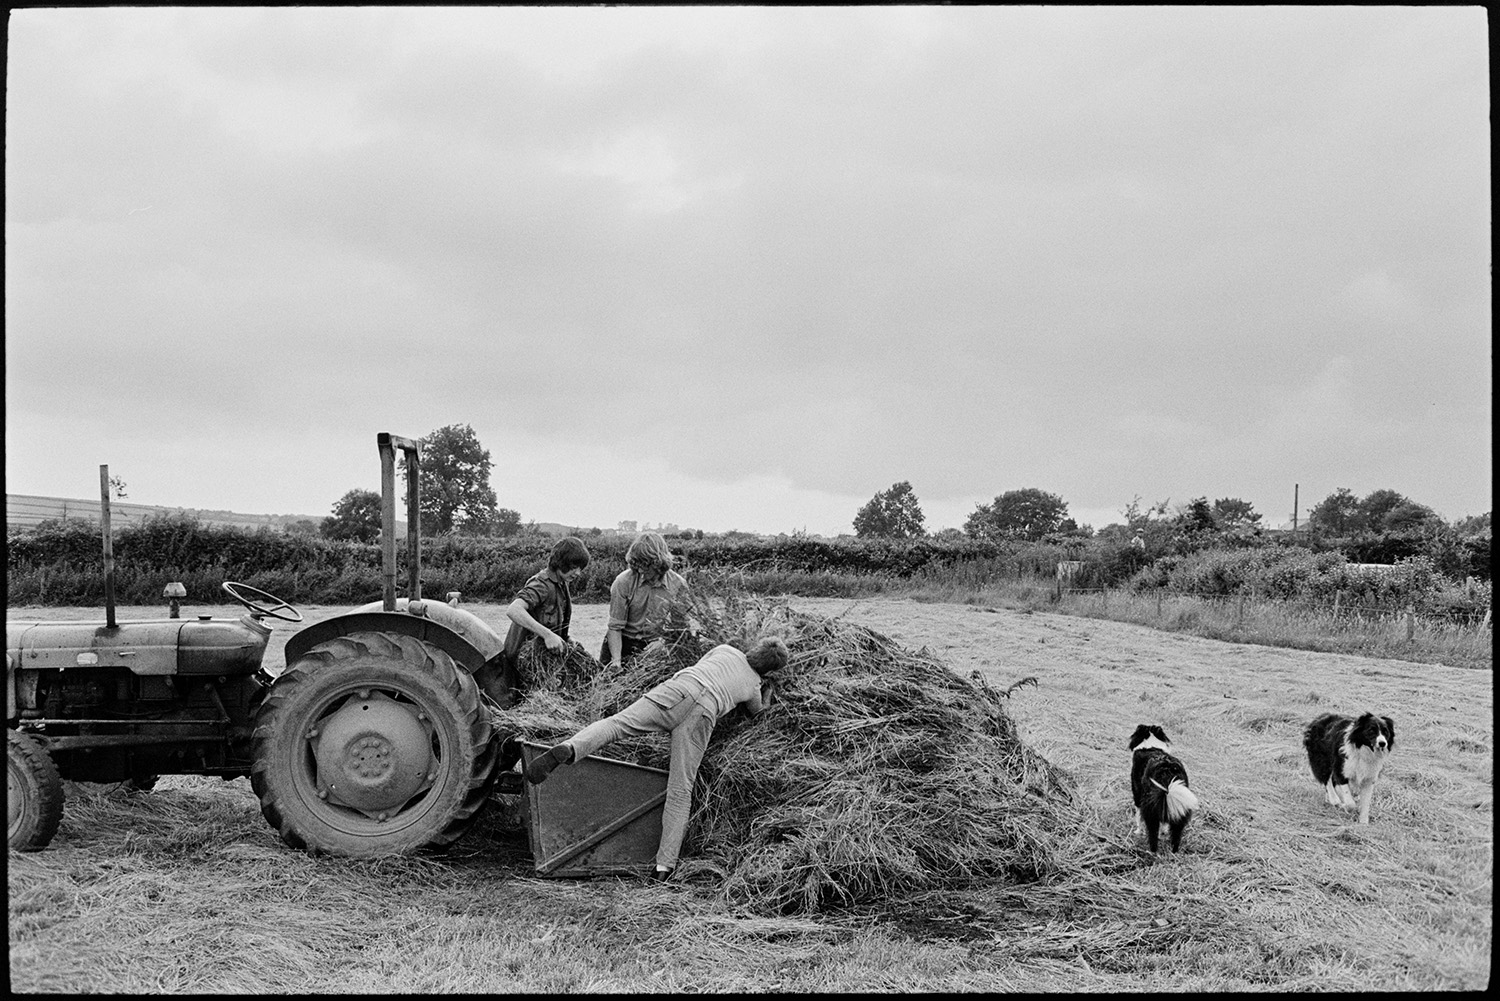 Farmers with thistles, tractor.
[Young men working in a hay field at Ashreigney. They are pulling thistles from the cut hay and putting them into a link box which is attached to a tractor. Two sheepdogs are in the field, and a man is looking over the hedge in the background.]